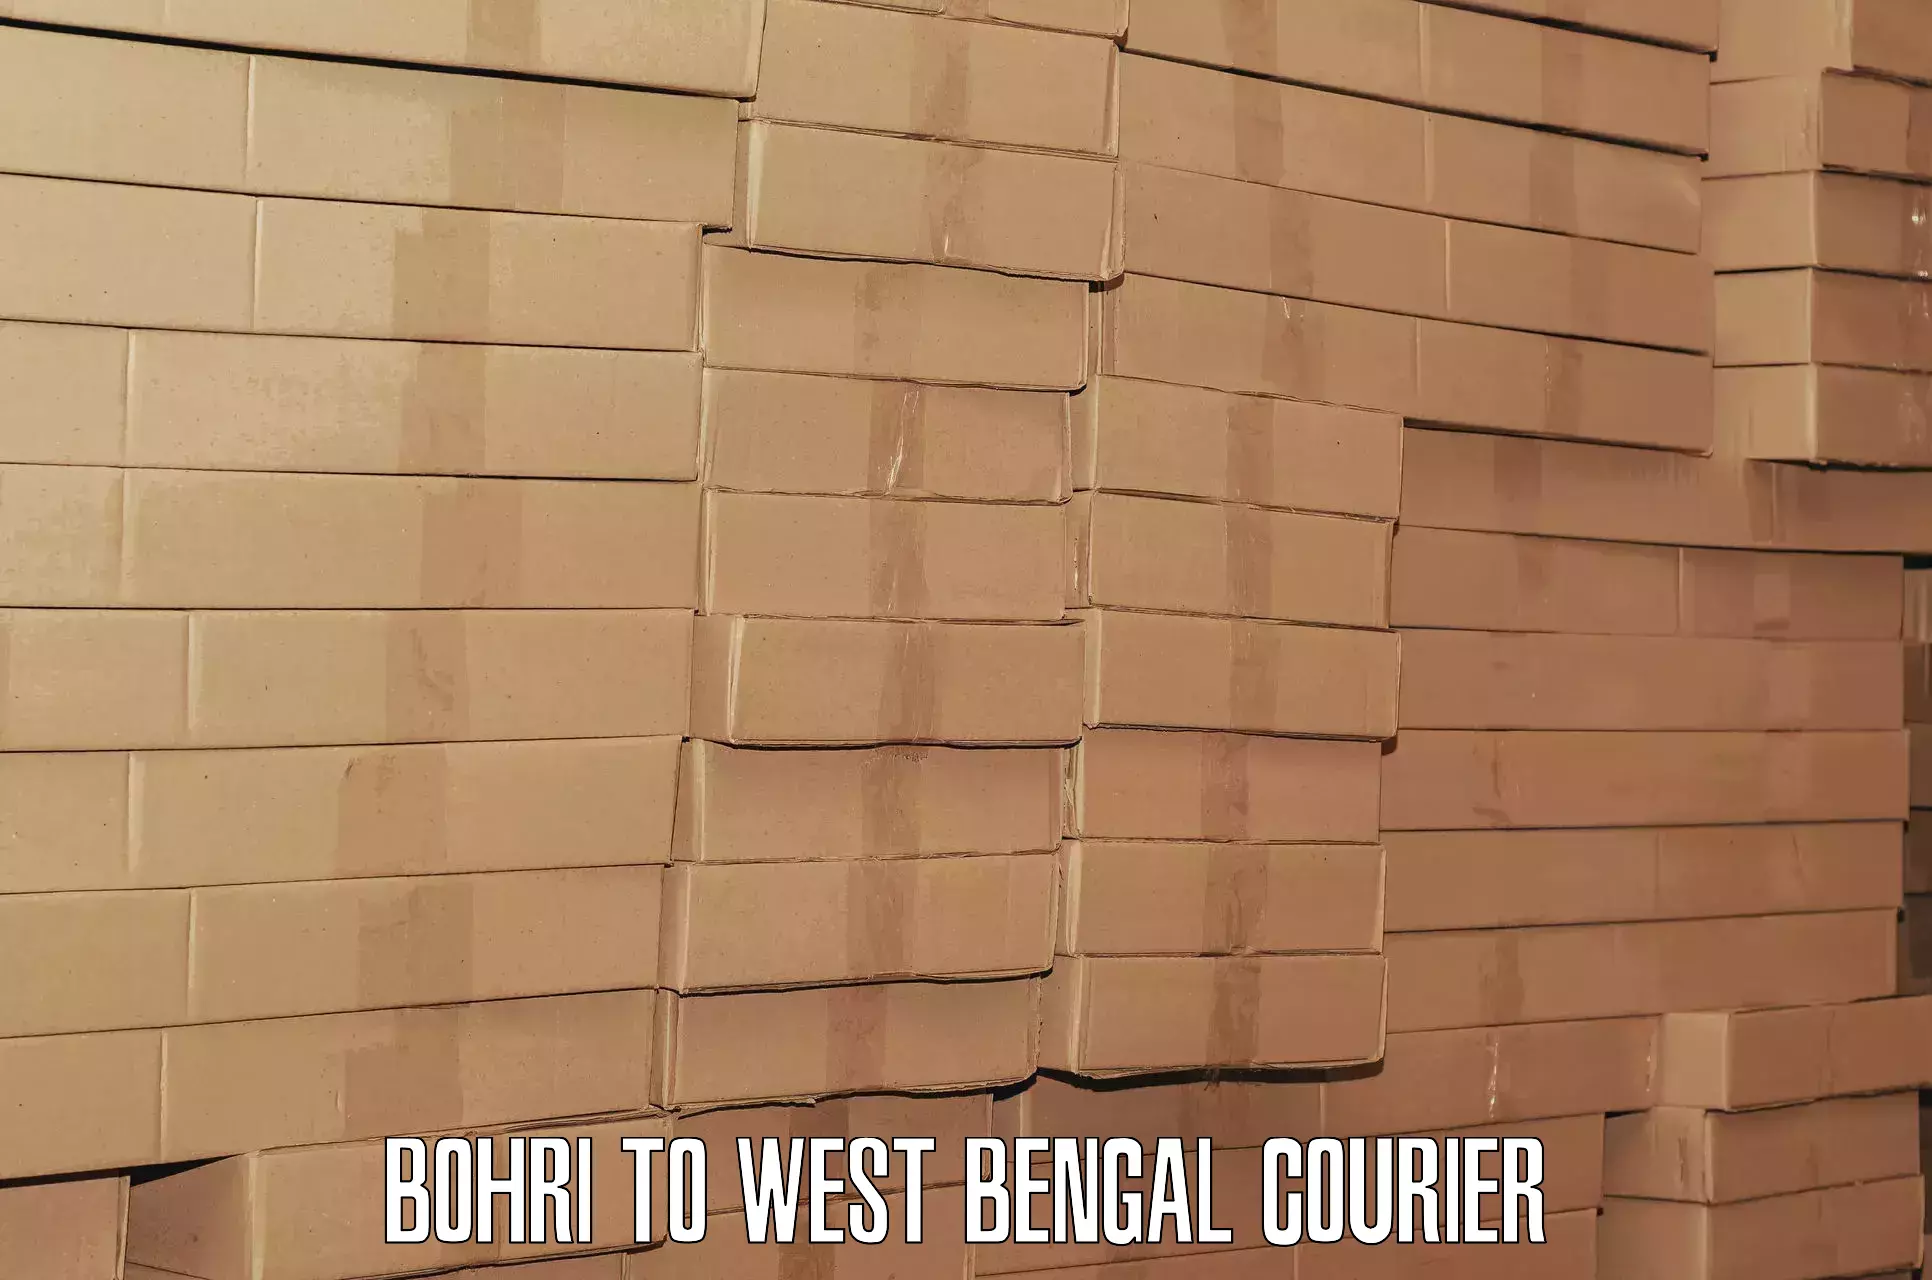 Luggage transport company Bohri to West Bengal